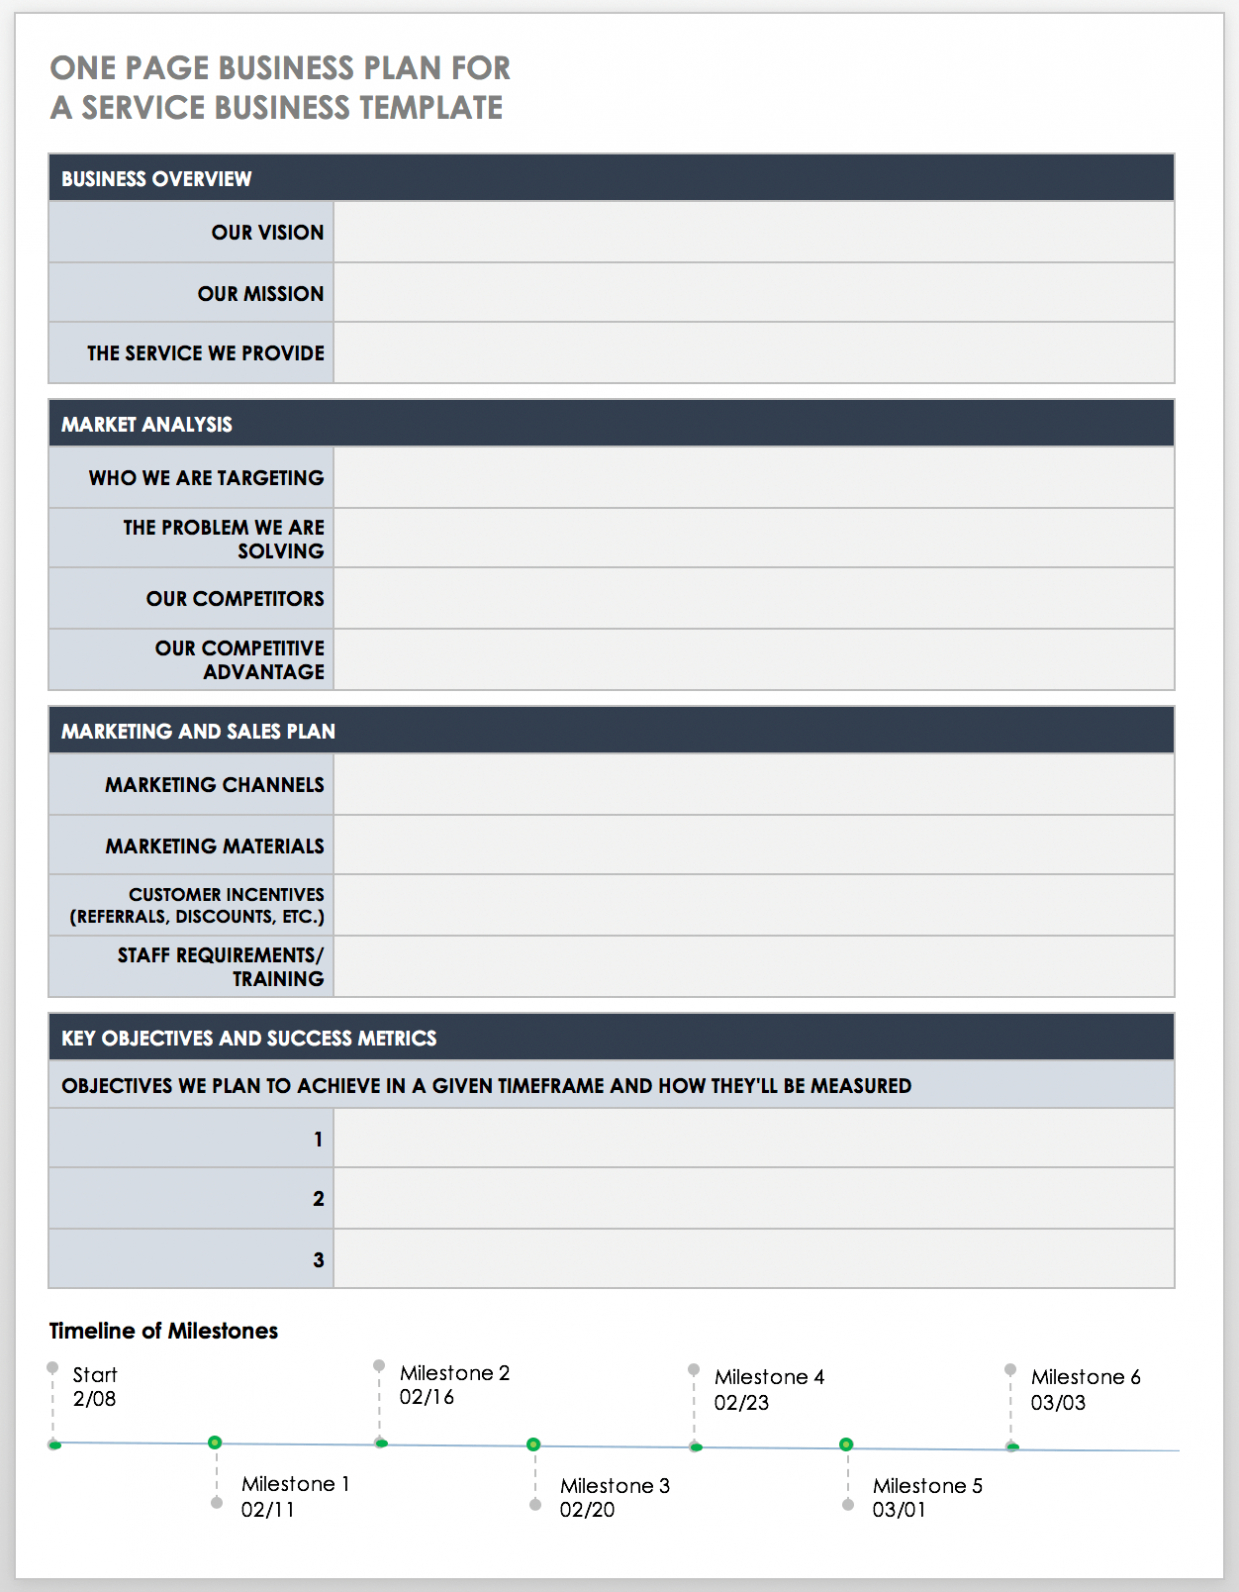 Free One-Page Business Plan Templates | Smartsheet with regard to High Level Business Plan Template